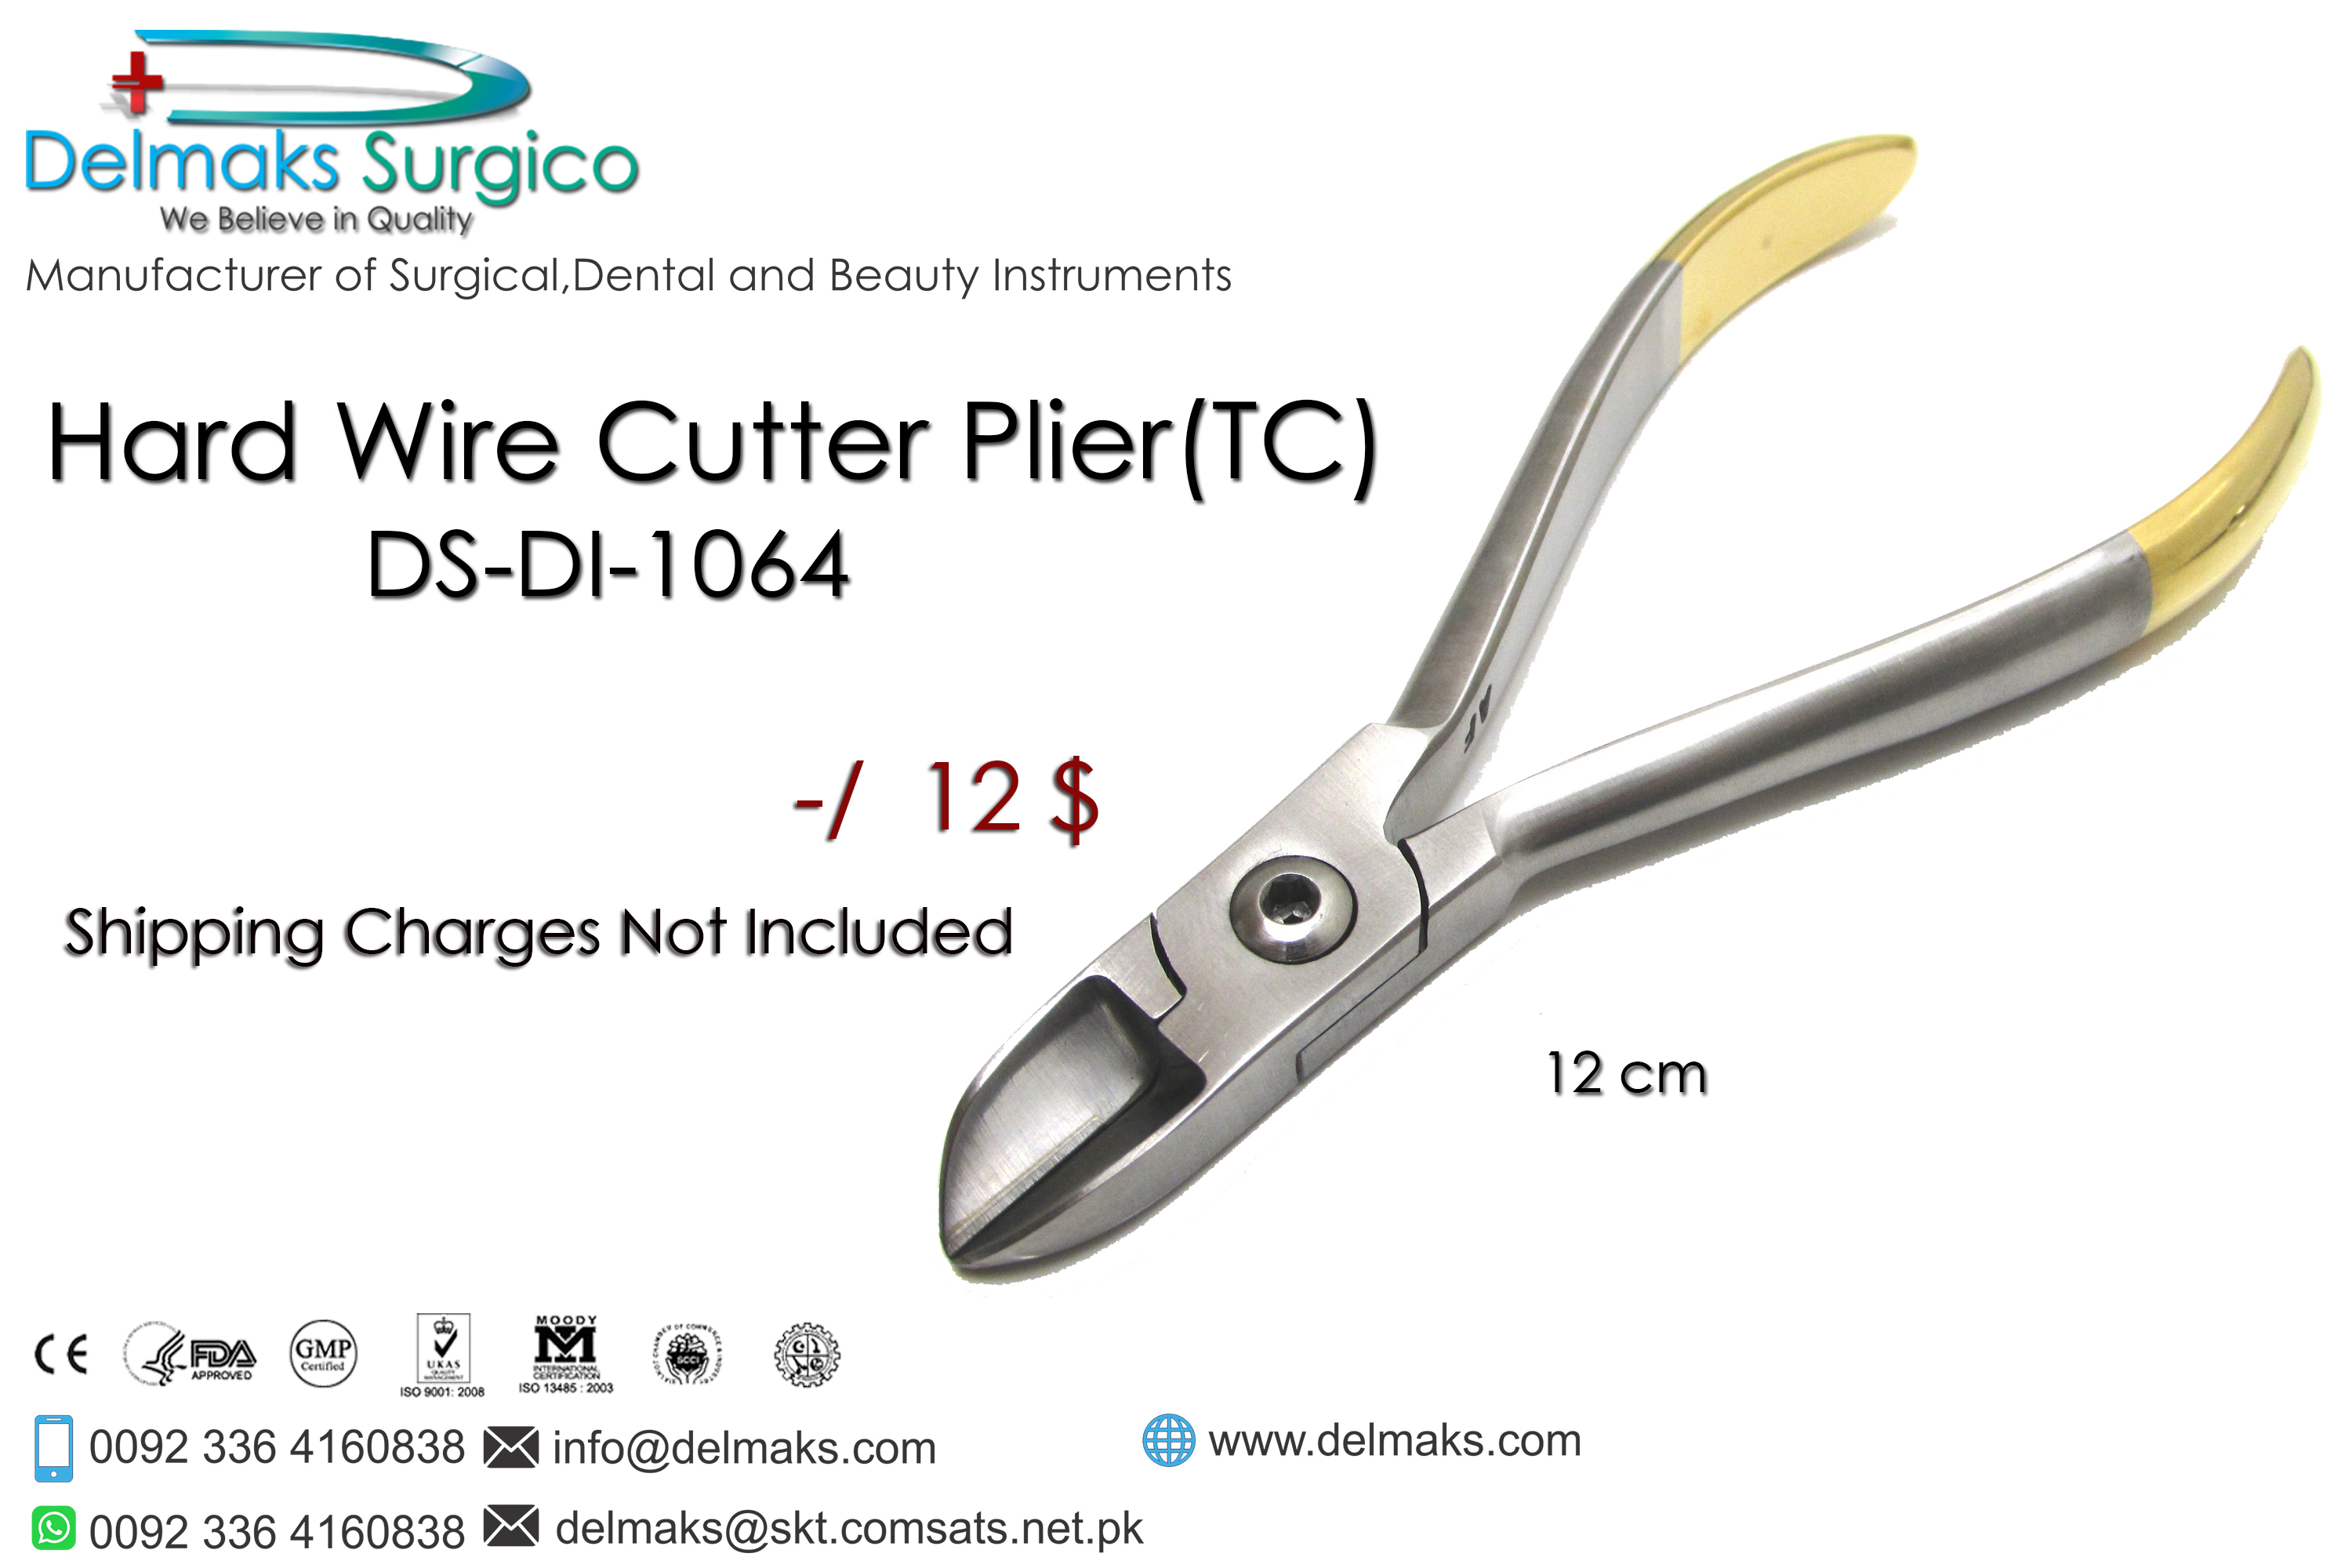 Hard Wire Cutter Plier(TC)-Orthodontic Pliers-Orthodontic Instruments-Dental Instruments-Delmaks Surgico